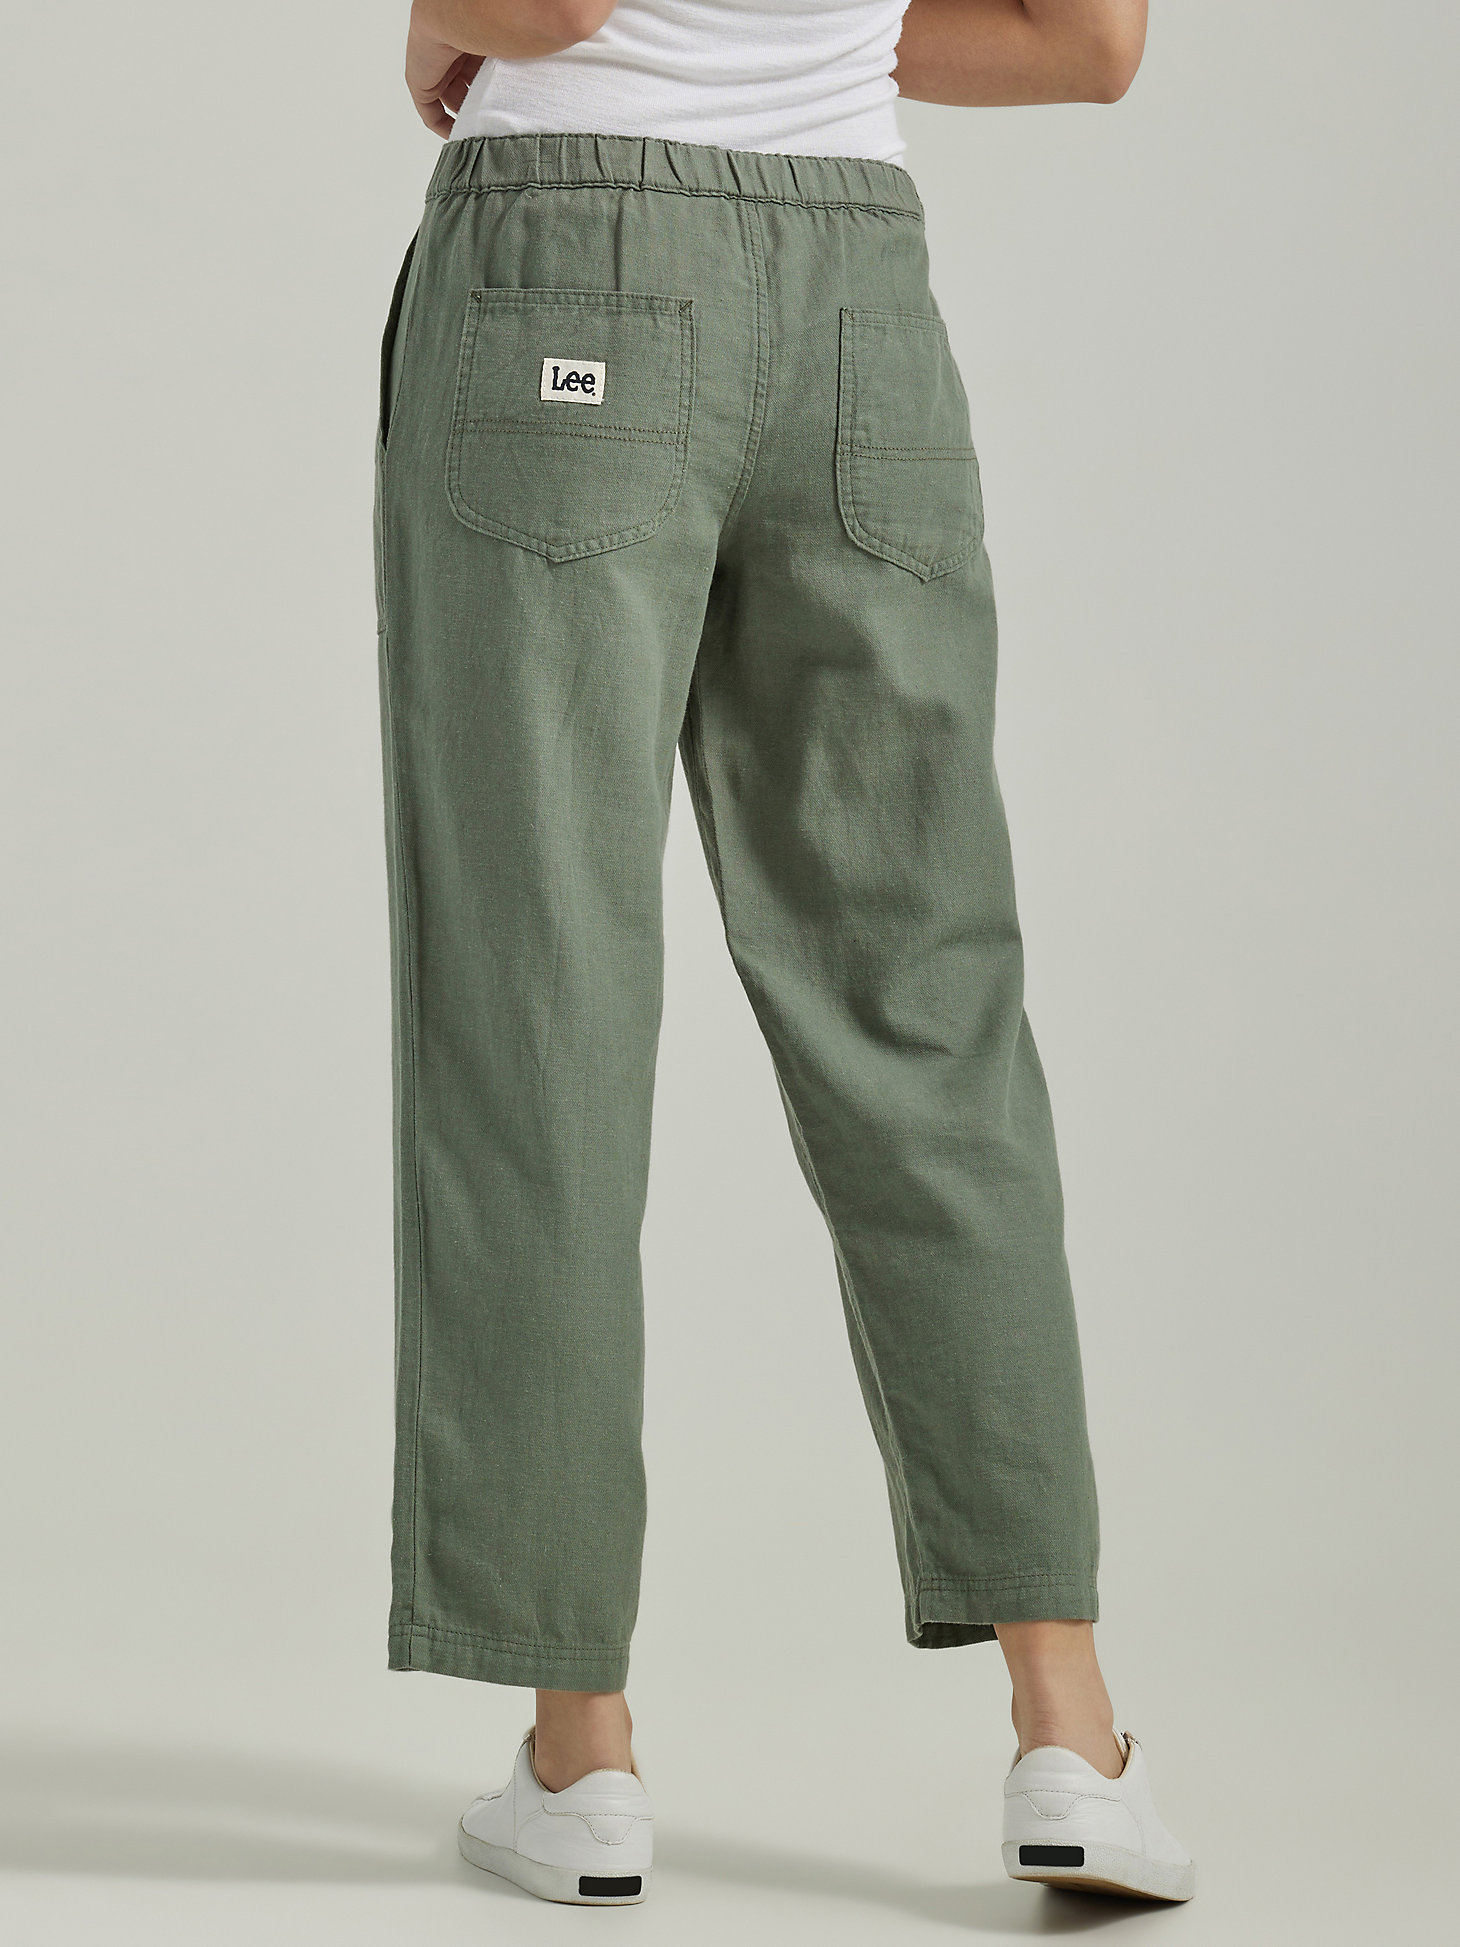 Women's Ultra Lux Pull-On Crop Pant in Fort Green alternative view 1